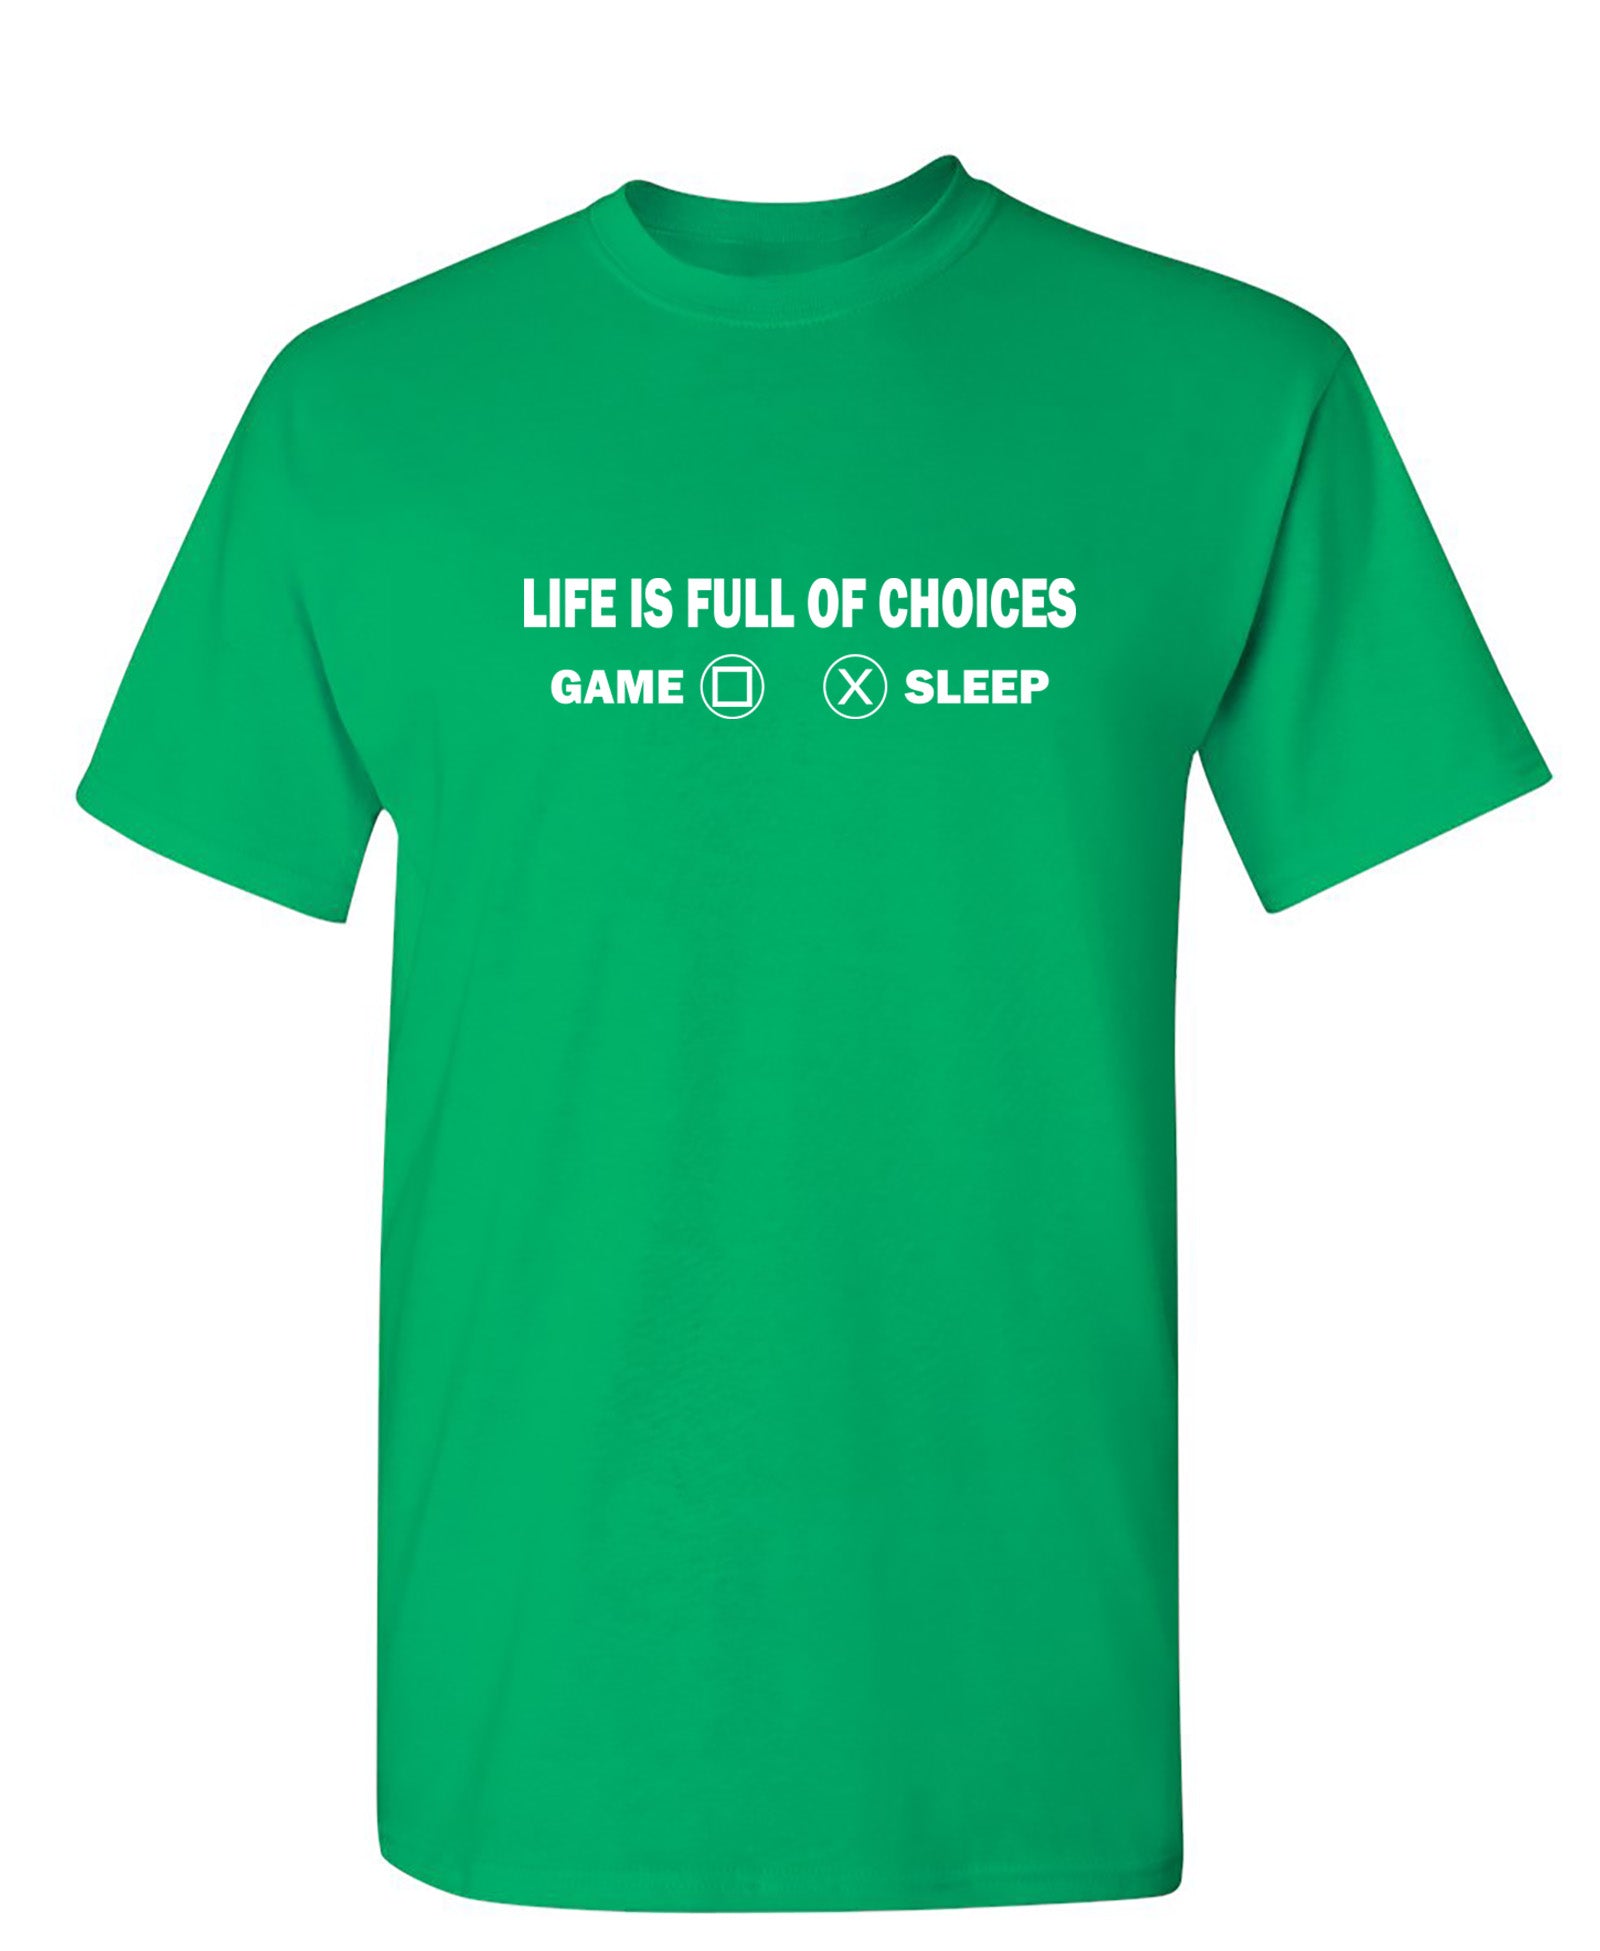 Life Is Full Of Choices - Funny T Shirts & Graphic Tees